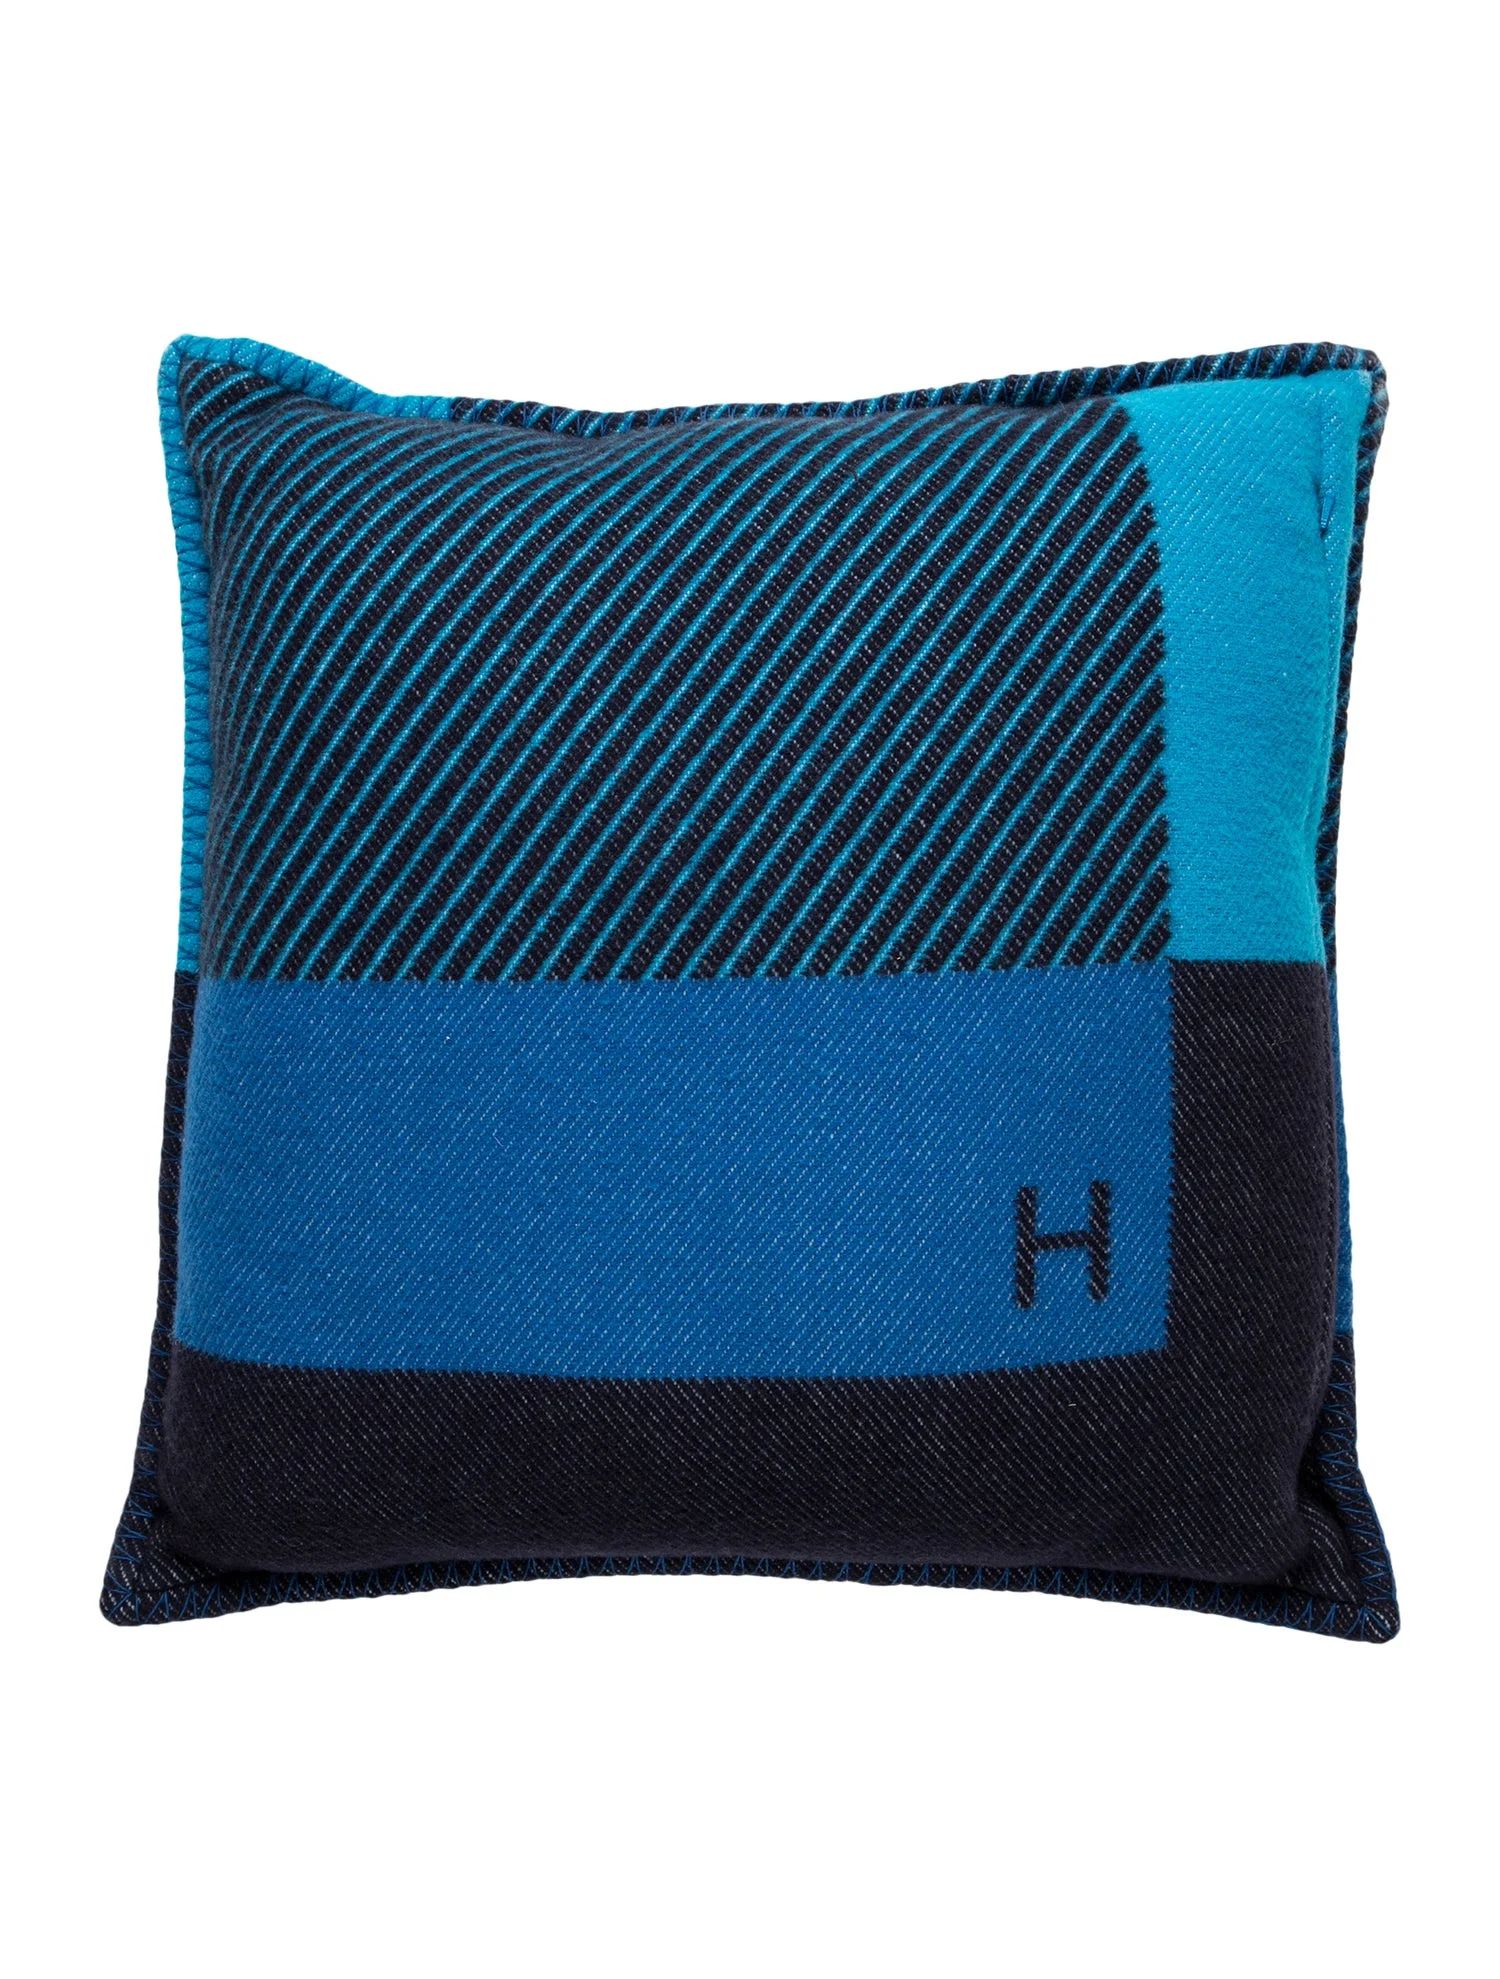 H Riviera Throw Pillow | The RealReal